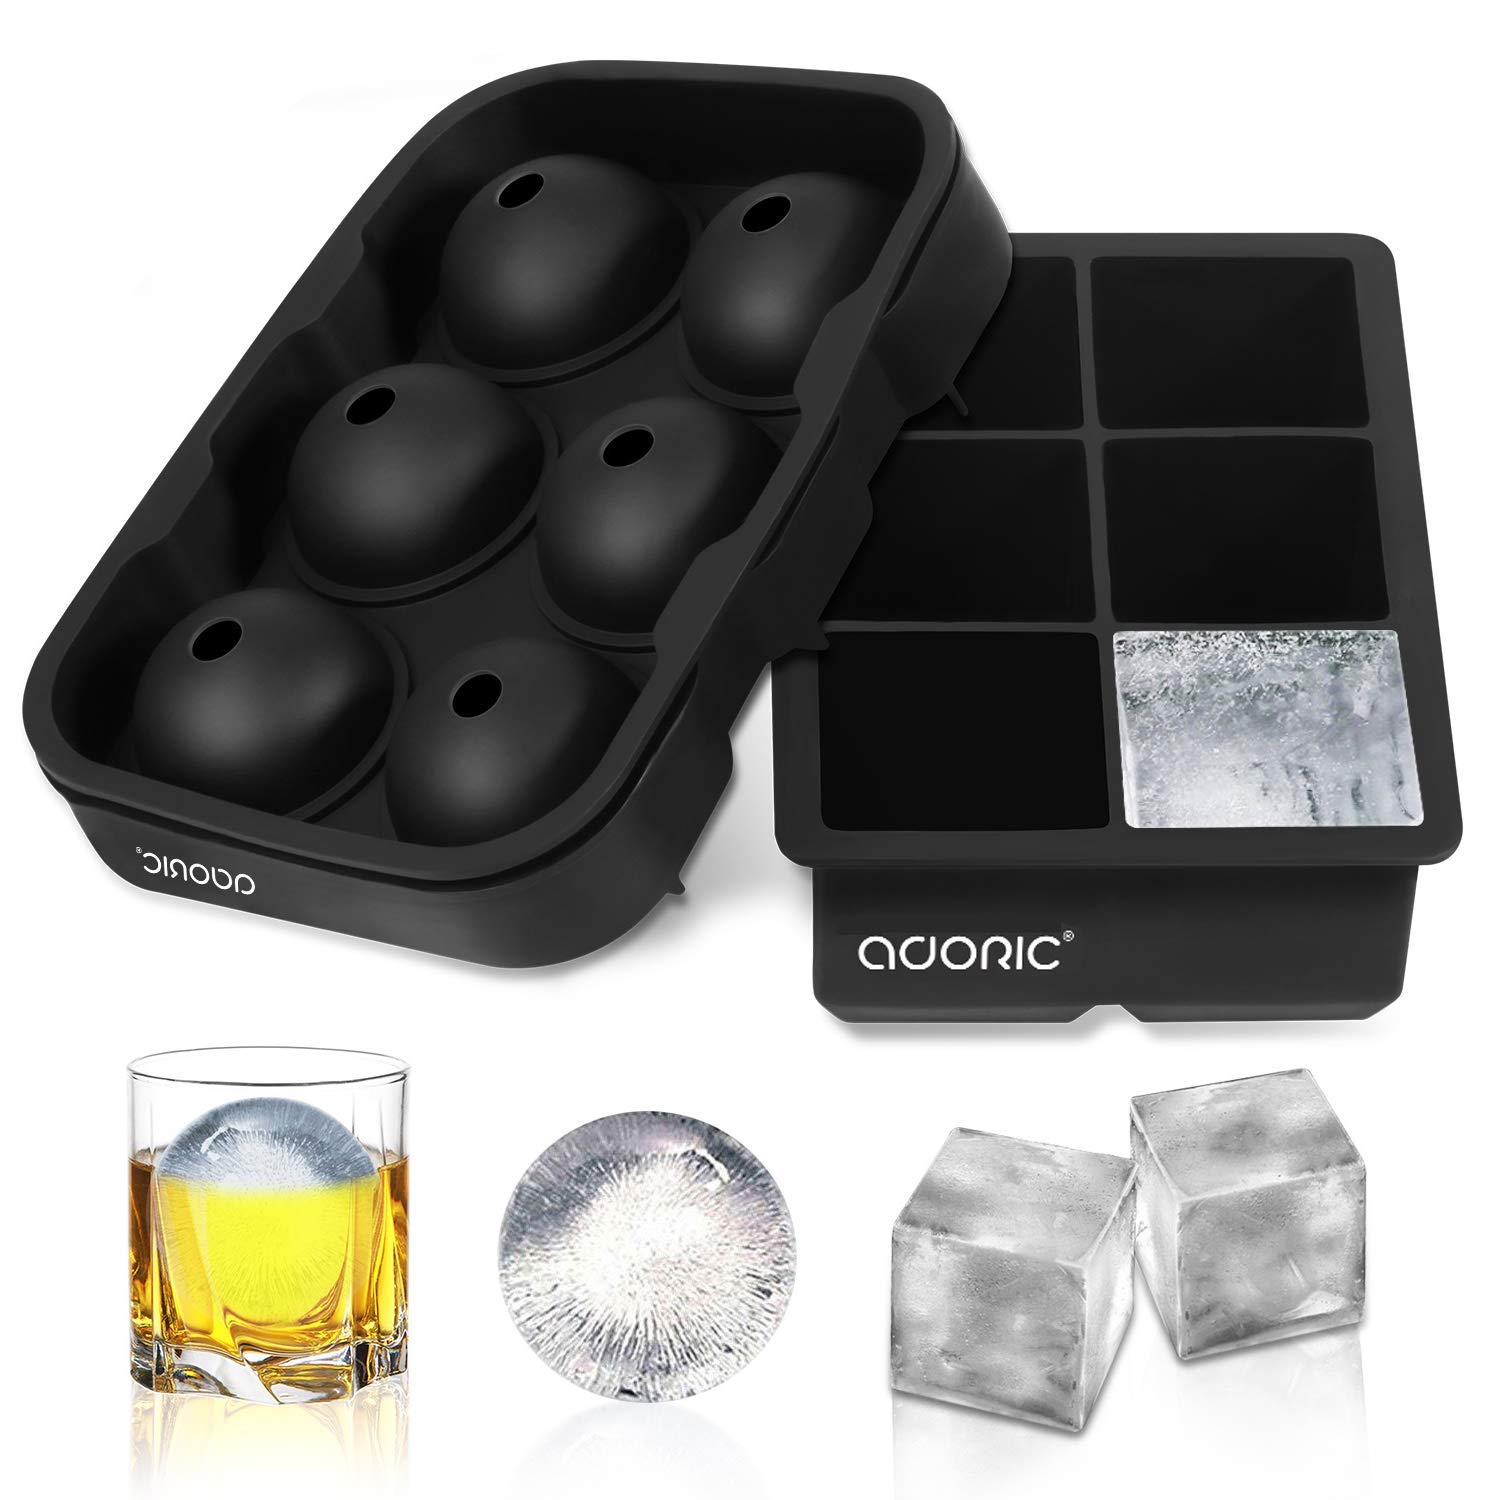 Adoric Silicone Black Ice Cube Trays, 2-Pack